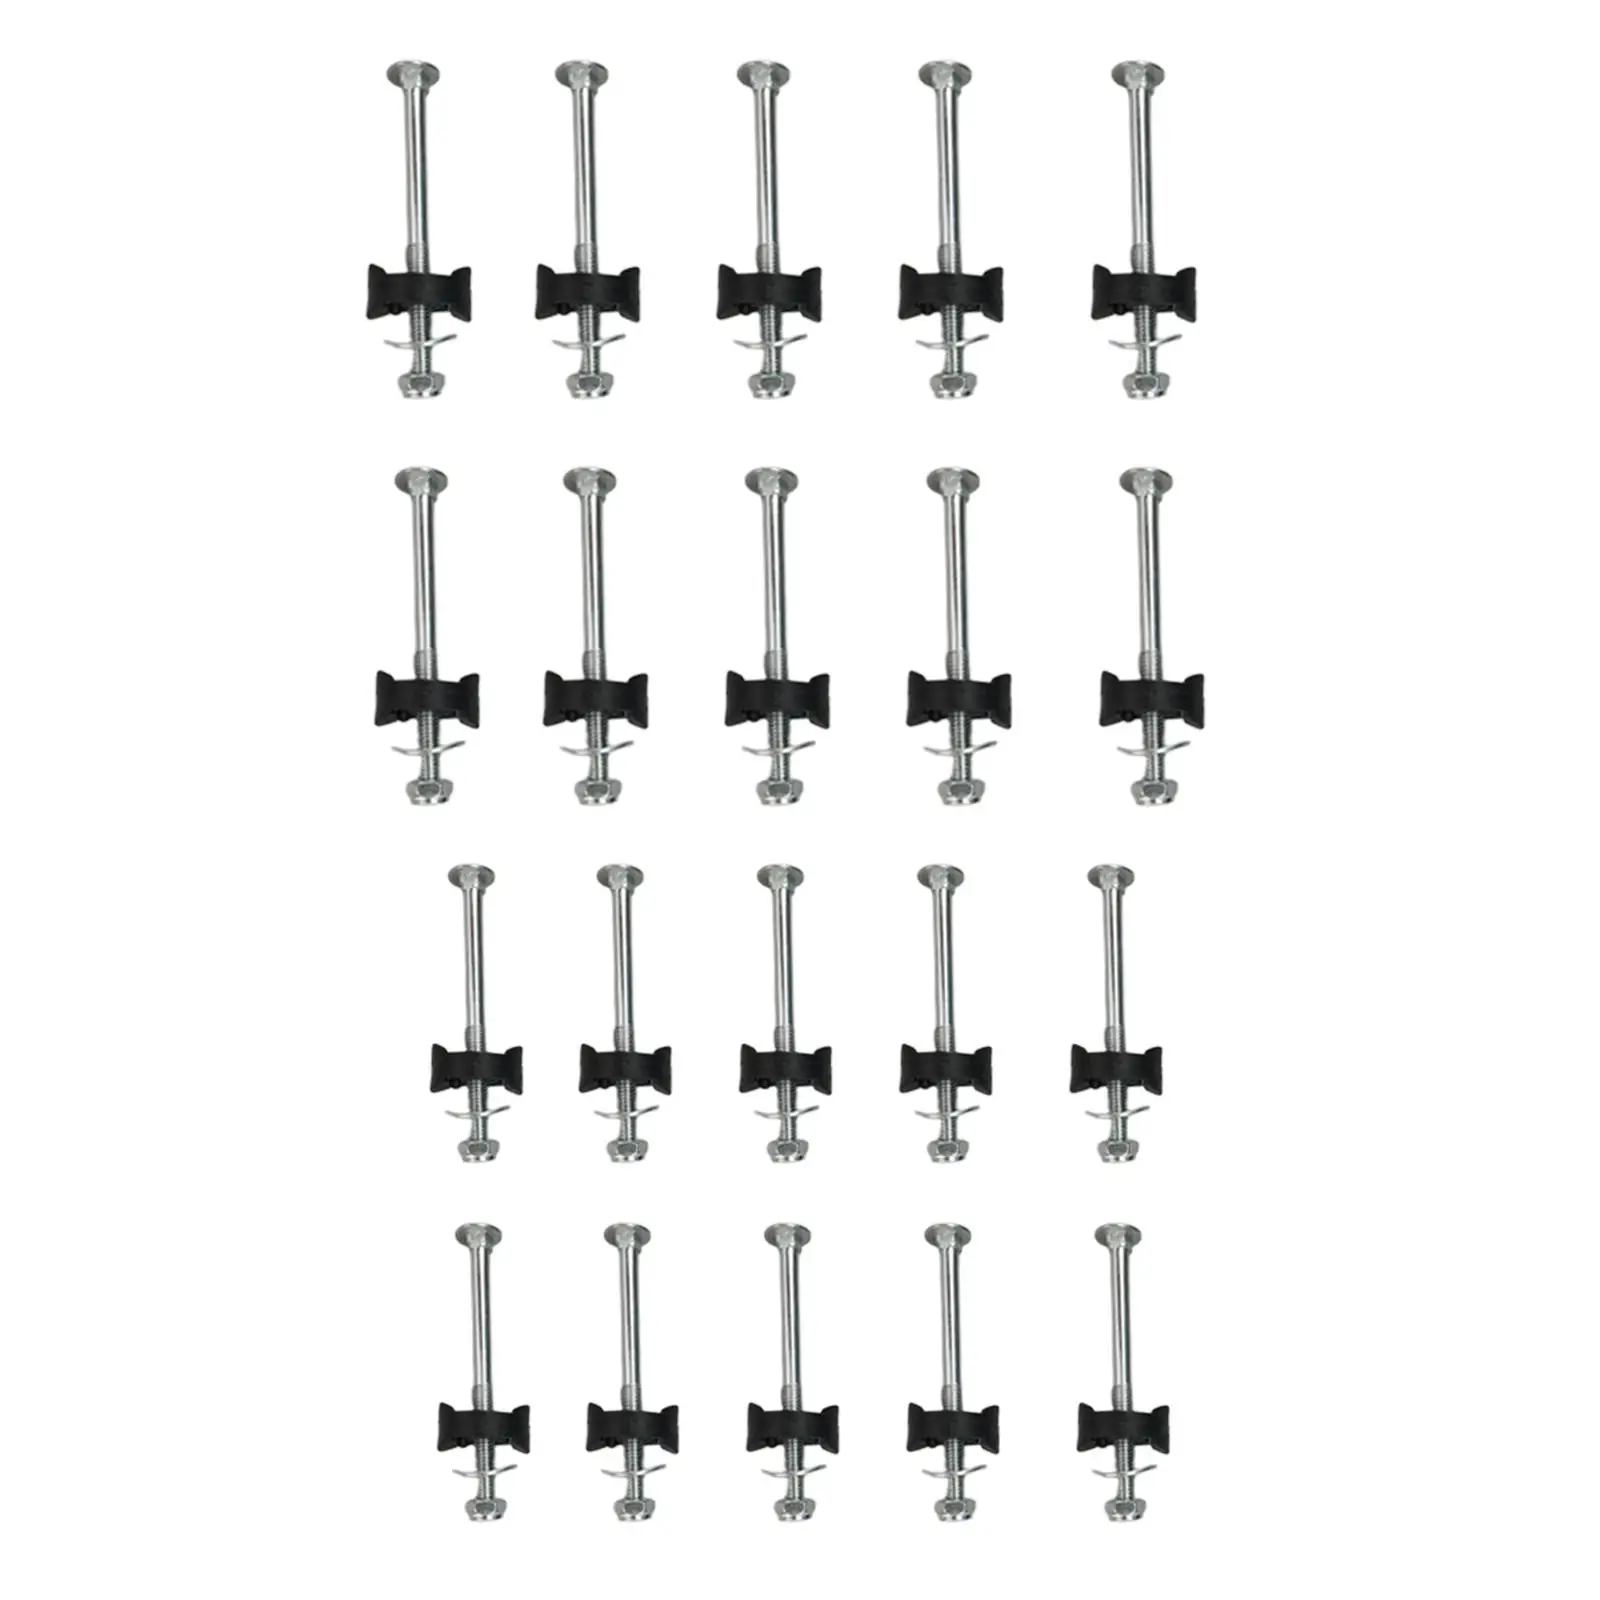 10x Fixing Trampoline Screws Anti Loose for Strengthen Trampoline Stability